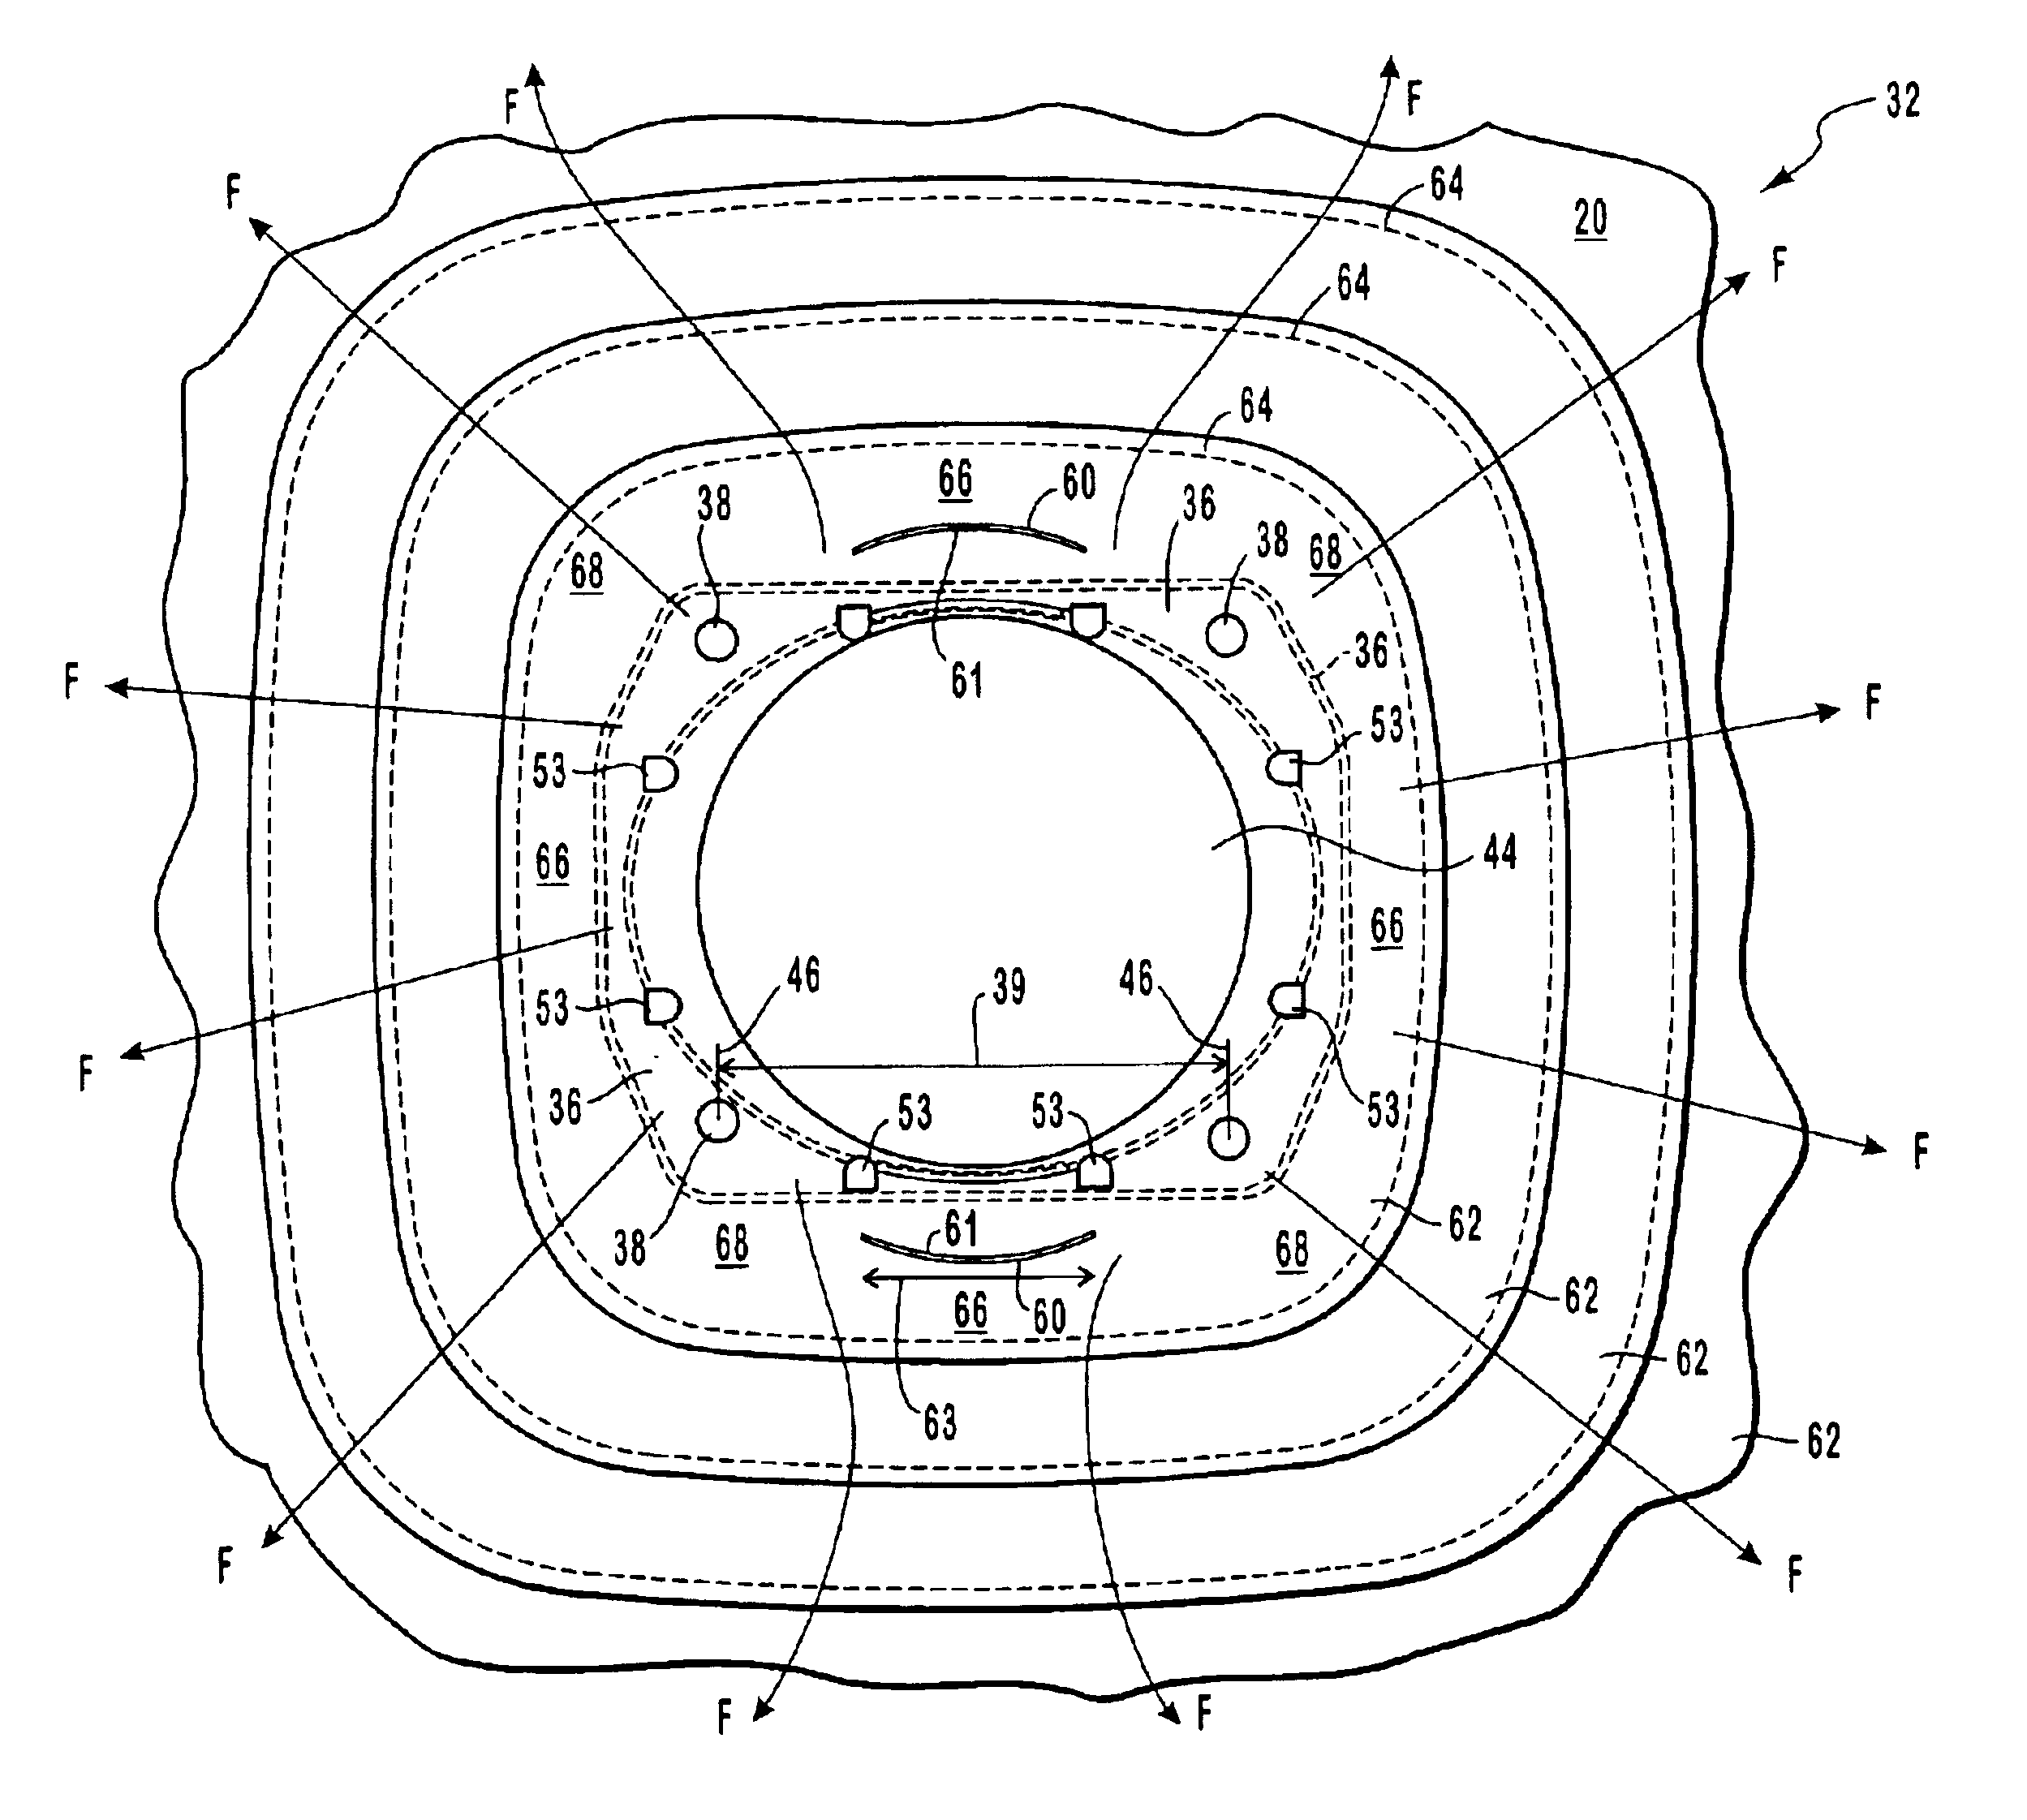 Load path control for inflatable airbag